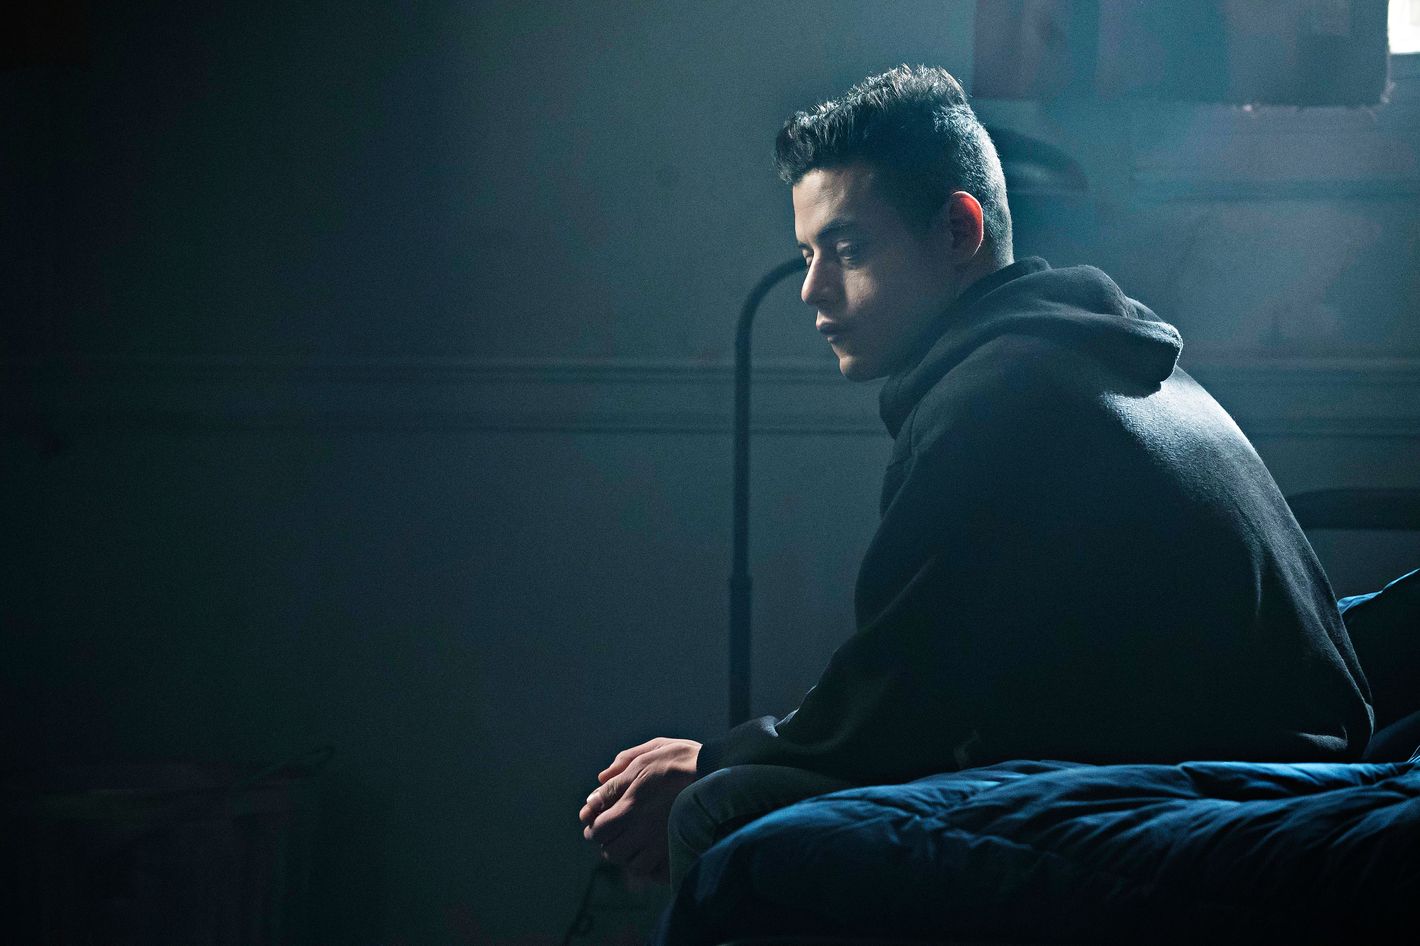 Mr. Robot, an unsung drama of the 2010s, you should stream right now - Vox